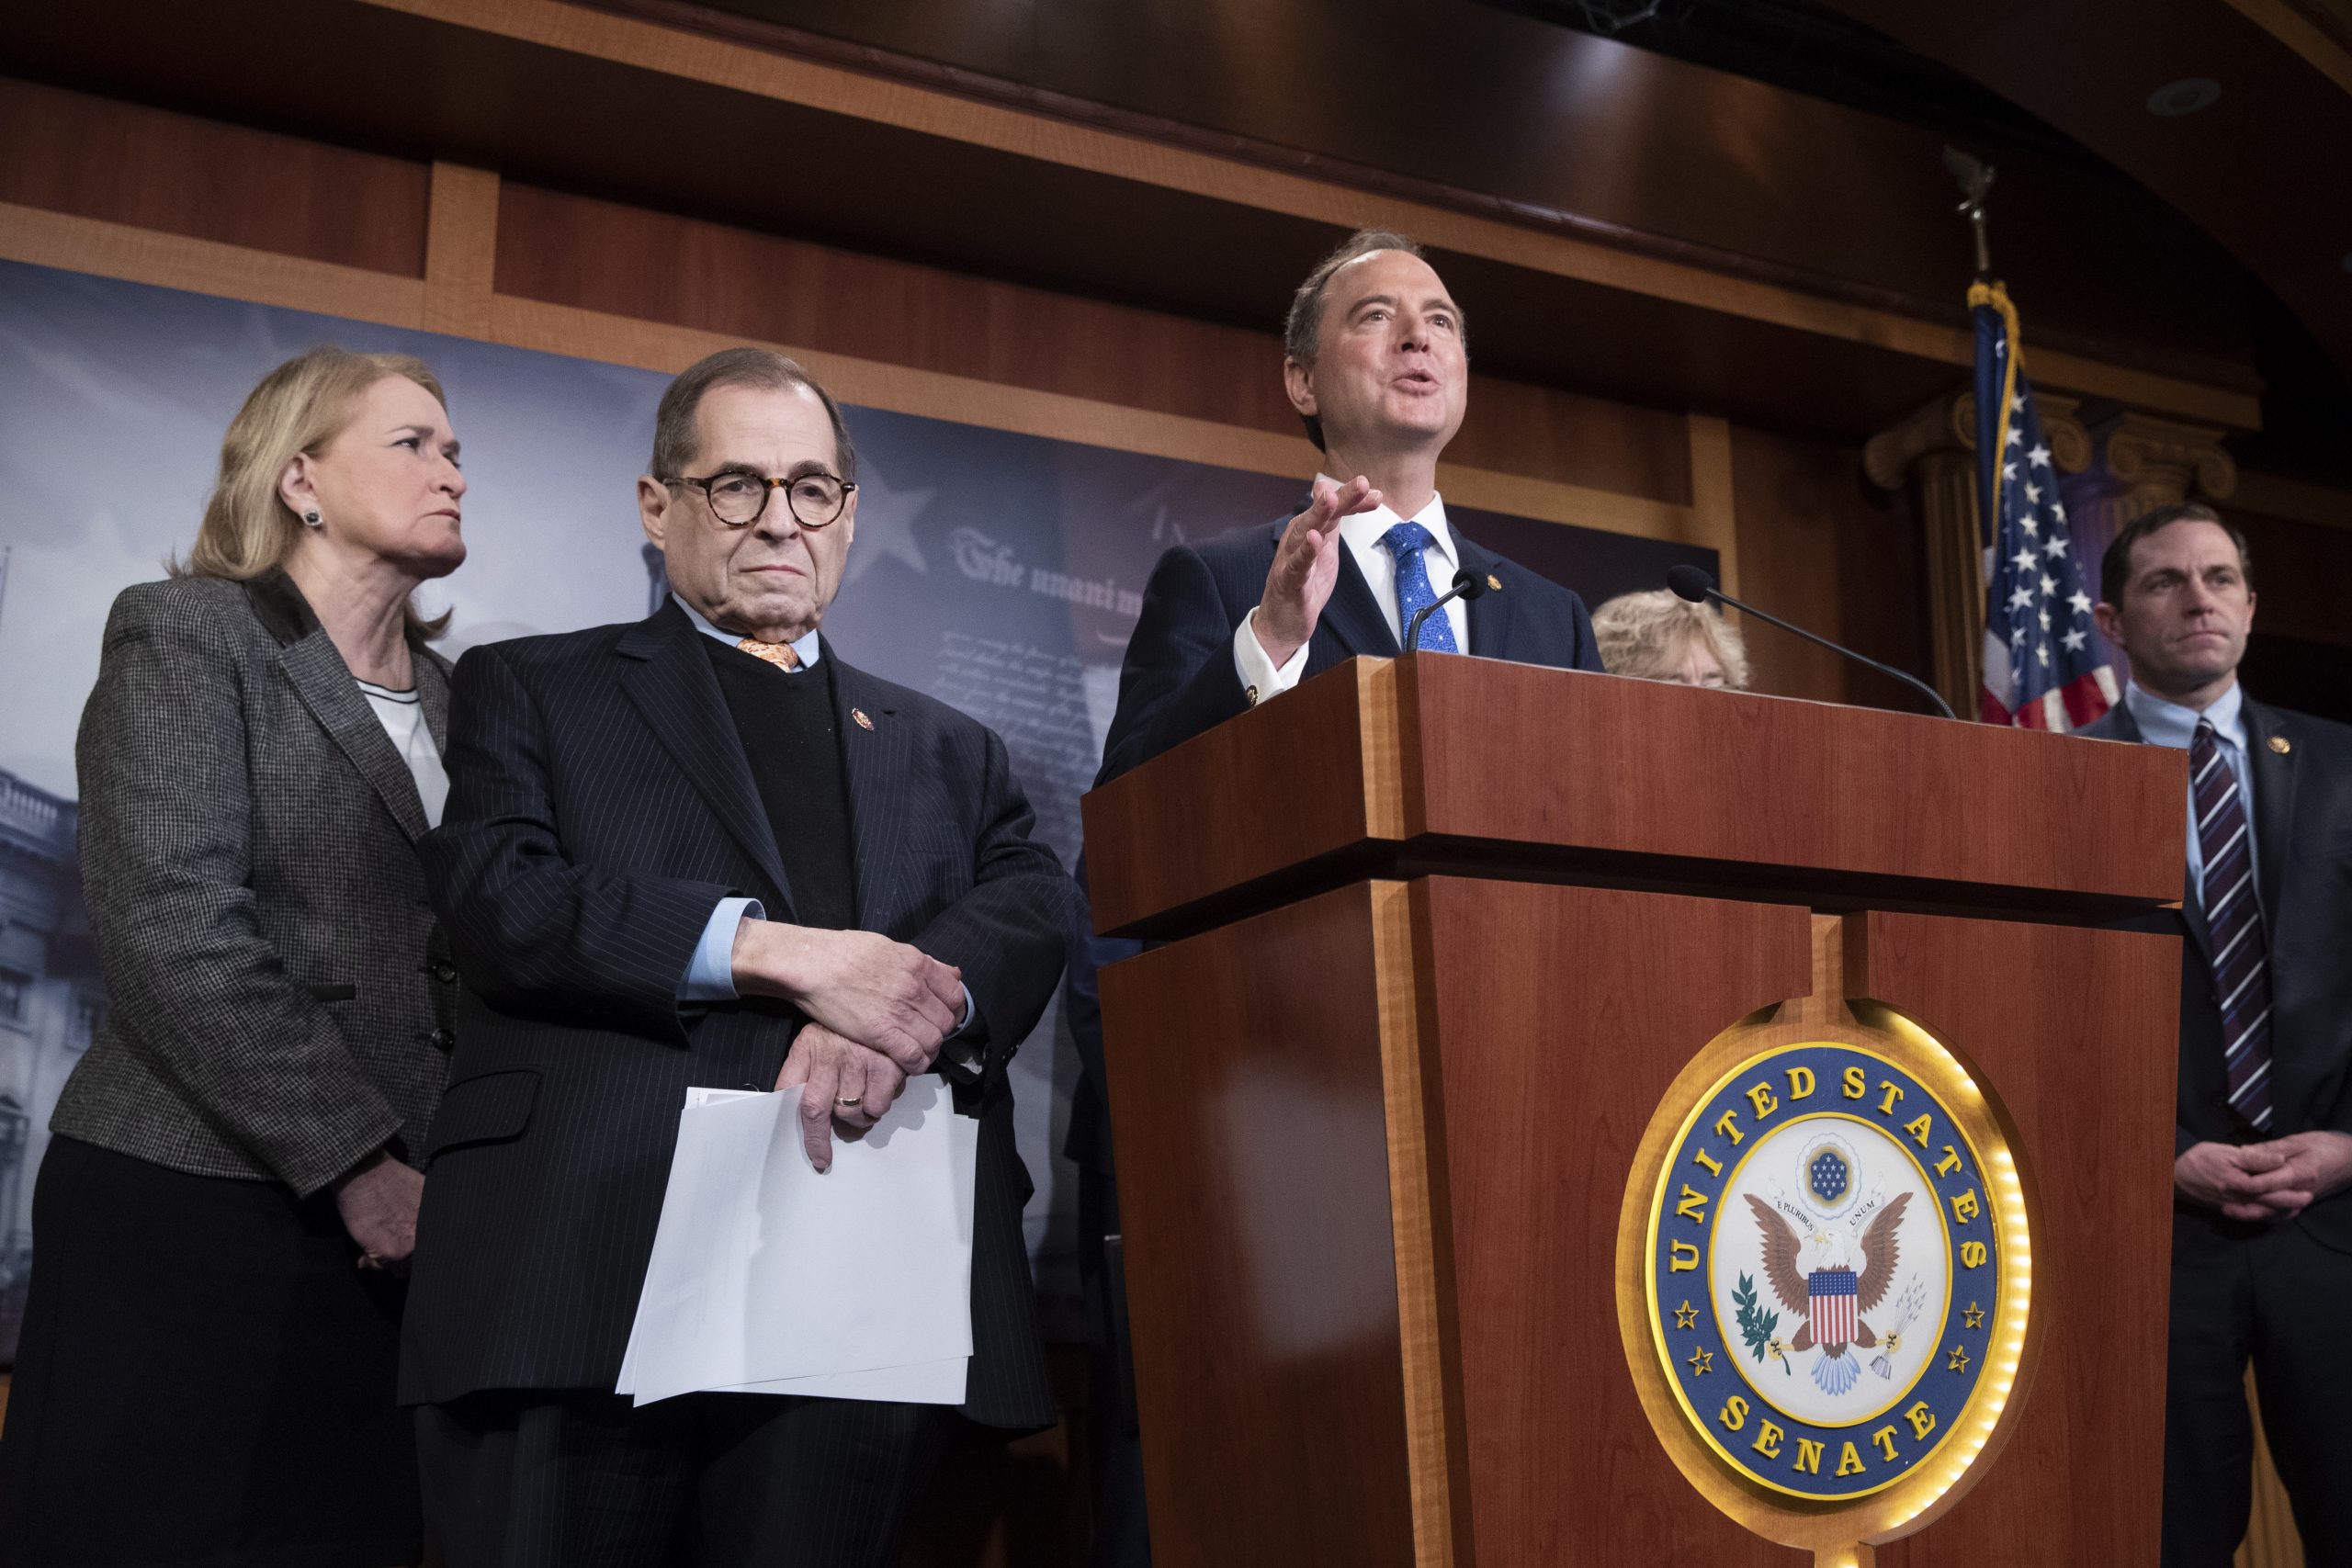 epa08164321 House Permanent Select Committee on Intelligence Chairman Adam Schiff (C) delivers remarks beside other House impeachment managers (L to R); Democratic Representative from Texas Sylvia Garcia, House Judiciary Committee Chairman Jerry Nadler and Democratic Representative from Colorado Jason Crow, 
during a news conference following the Senate impeachment trial in the US Capitol in Washington, DC, USA, 25 January 2020. Following three days of opening arguments from House impeachment managers, members of the defense team for US President Donald J. Trump began their defense in the impeachment trial of US President Donald J. Trump.  EPA/MICHAEL REYNOLDS